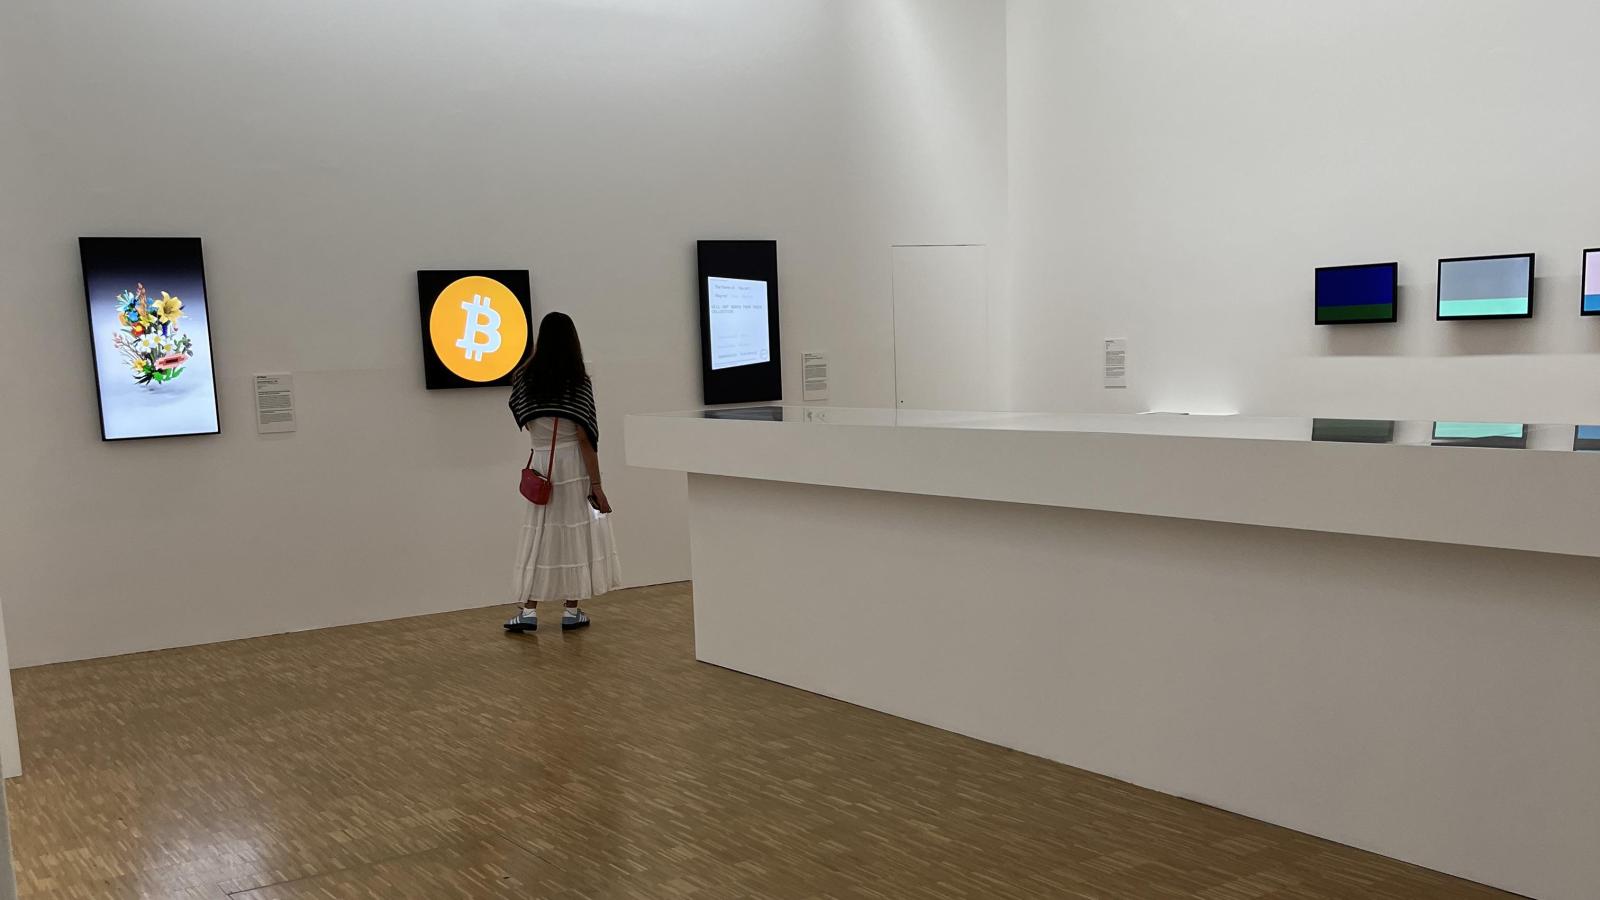 image of a person in a gallery space viewing NFTs - virtual images